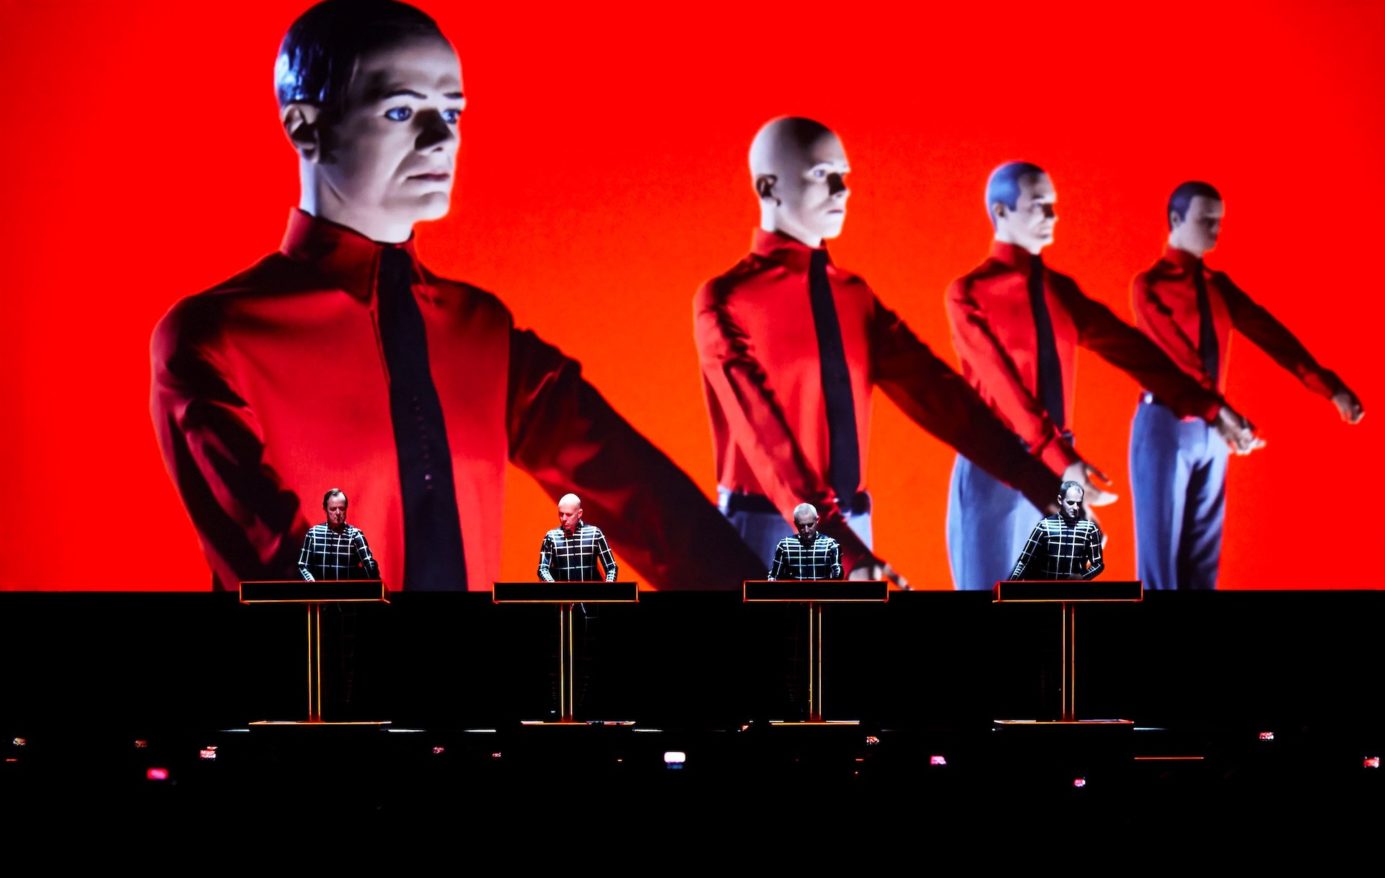 Kraftwerk at MASS MoCA feature image, band members performing on stage in front of red screen